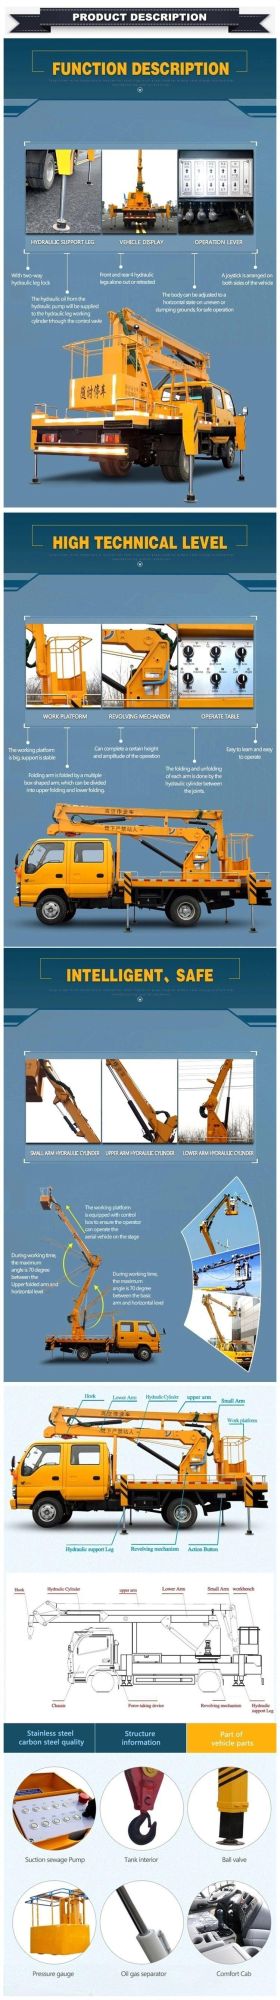 Hot Sale High Quality Telescopic Folding Arm Lift Mobile Trailer Model Articulated Boom Lift Tables Trucks 20meters 22meters 24meters Articulated Cherry Picker